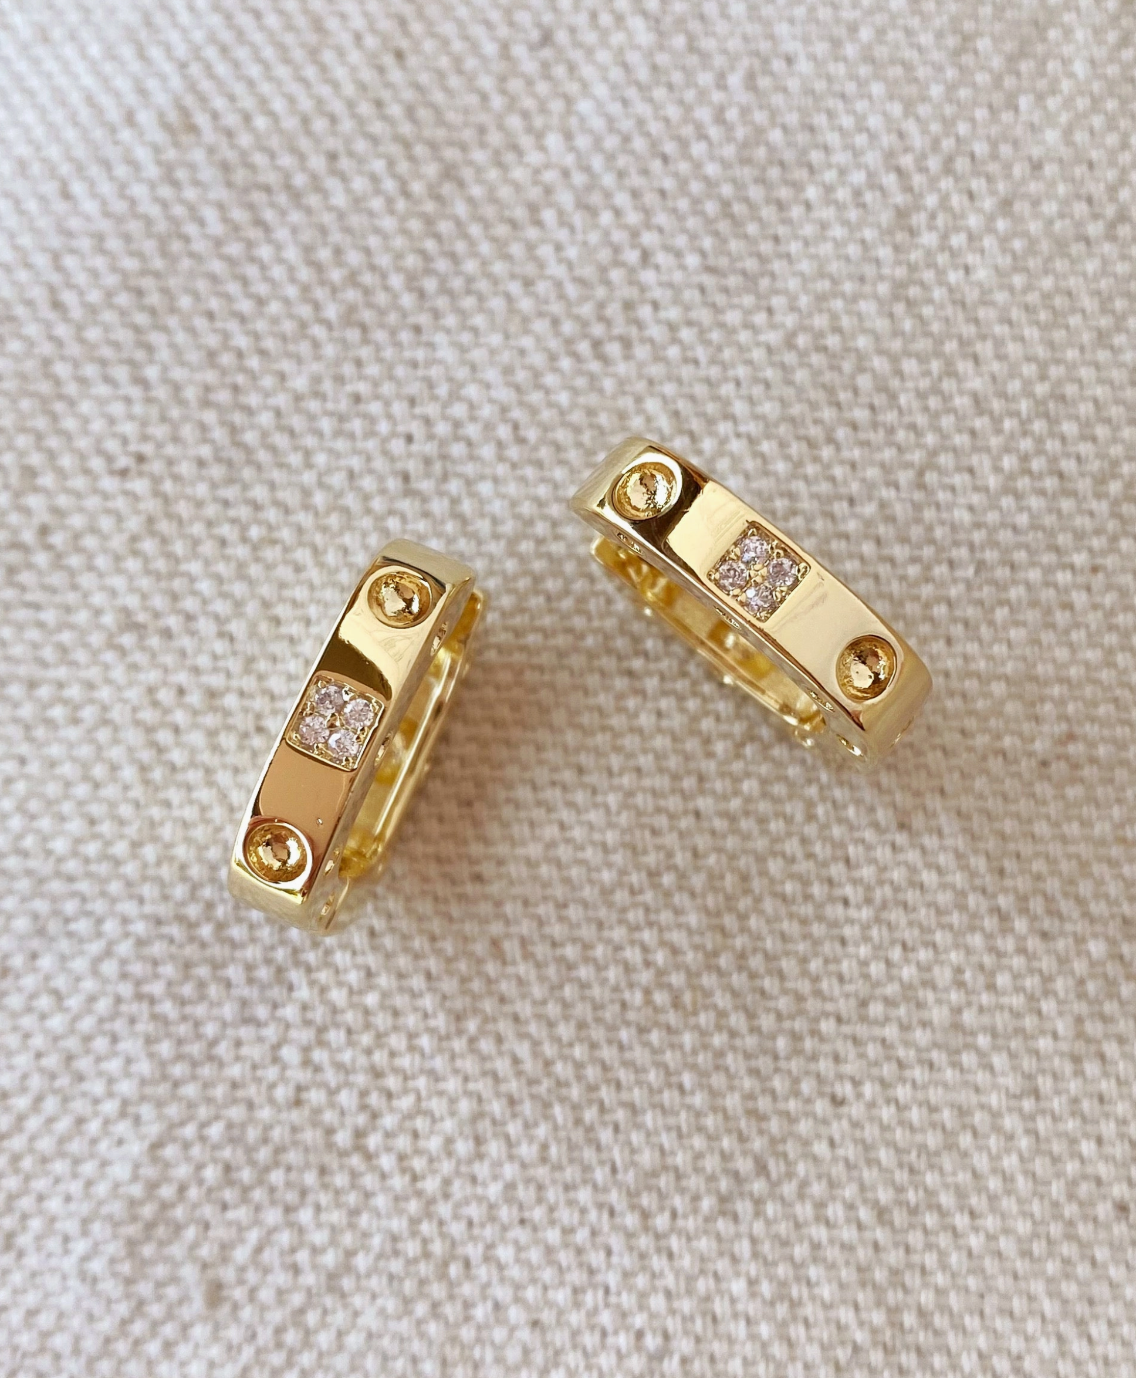 18k Gold Filled Small Rectangular Clicker Hoop Earrings with